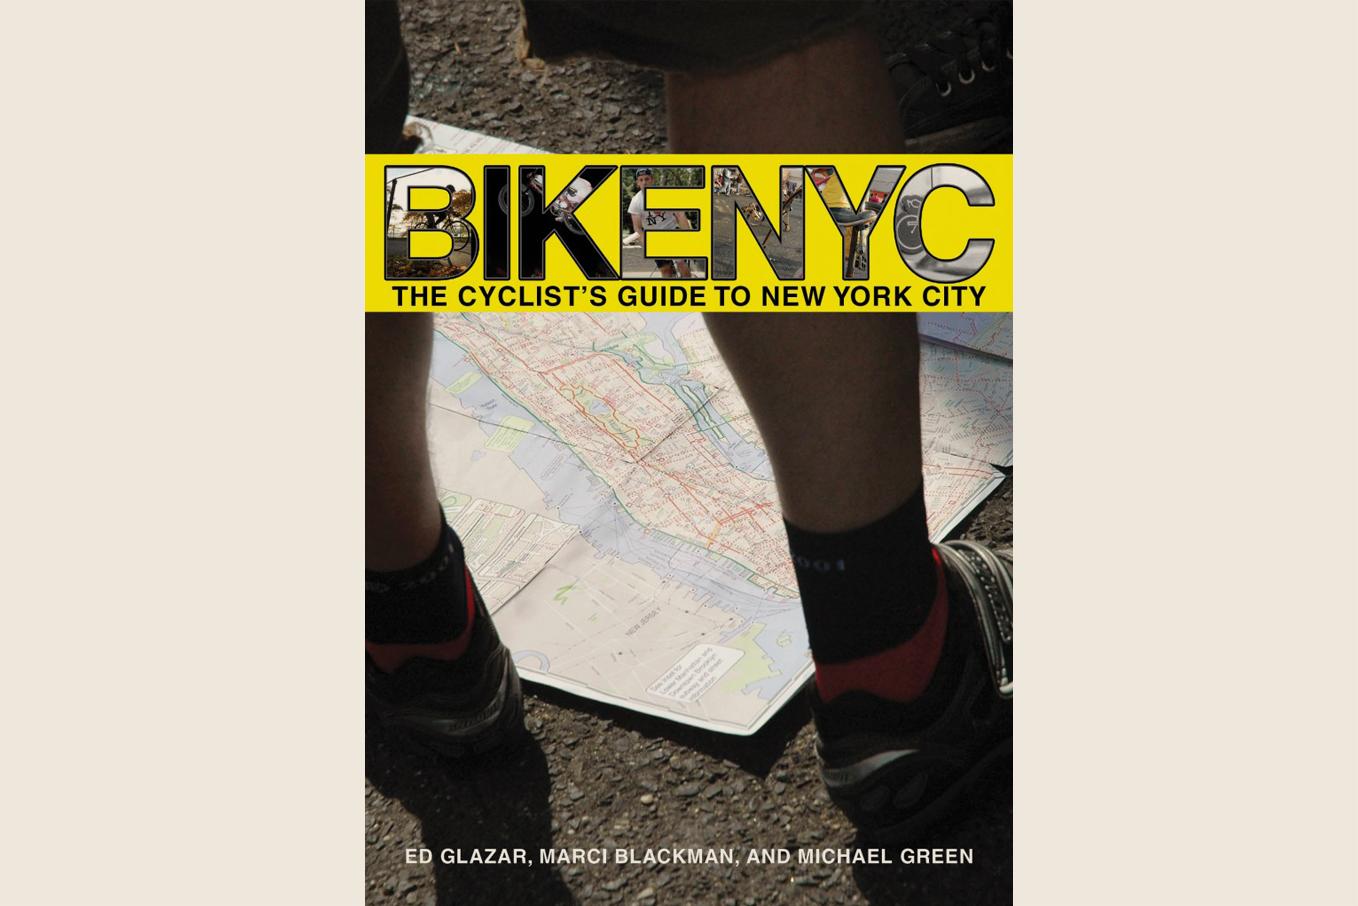 Bike NYC: The Cyclist's Guide to New York City Ed Glazar, Marci Blackman and Michael Green